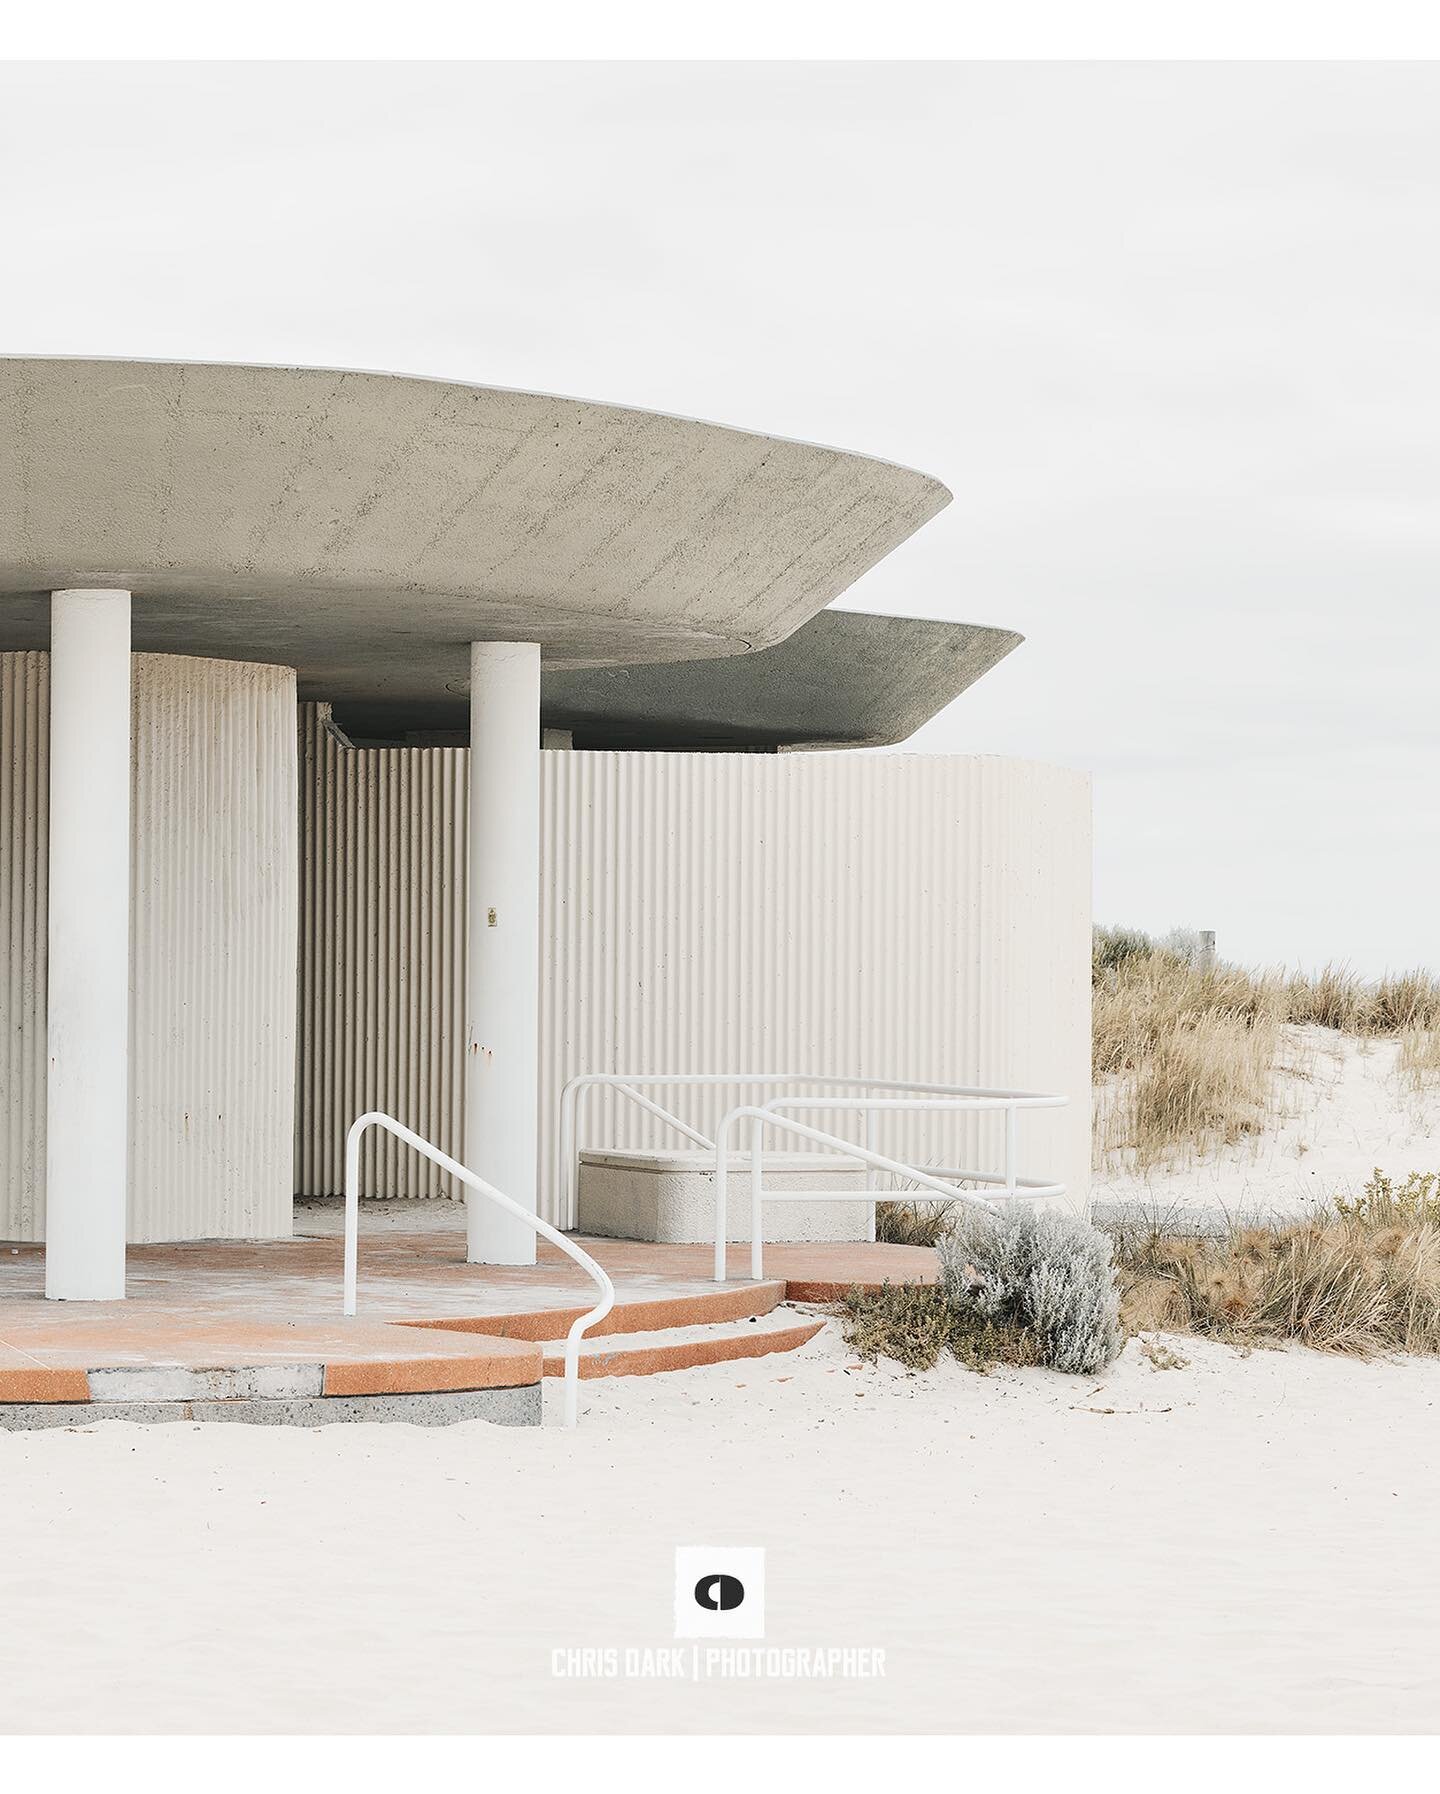 Nostalgic, functional and simple 70&rsquo;s beach kiosk in true Brutalism design style. ⁣Prints available @artloversaustralia and @theartling 
.⁣
.⁣
.⁣
.⁣
.⁣
#citybeachperth #photography #brutbuilds #artloversaustralia #theartling #saatchiart #eizo_a